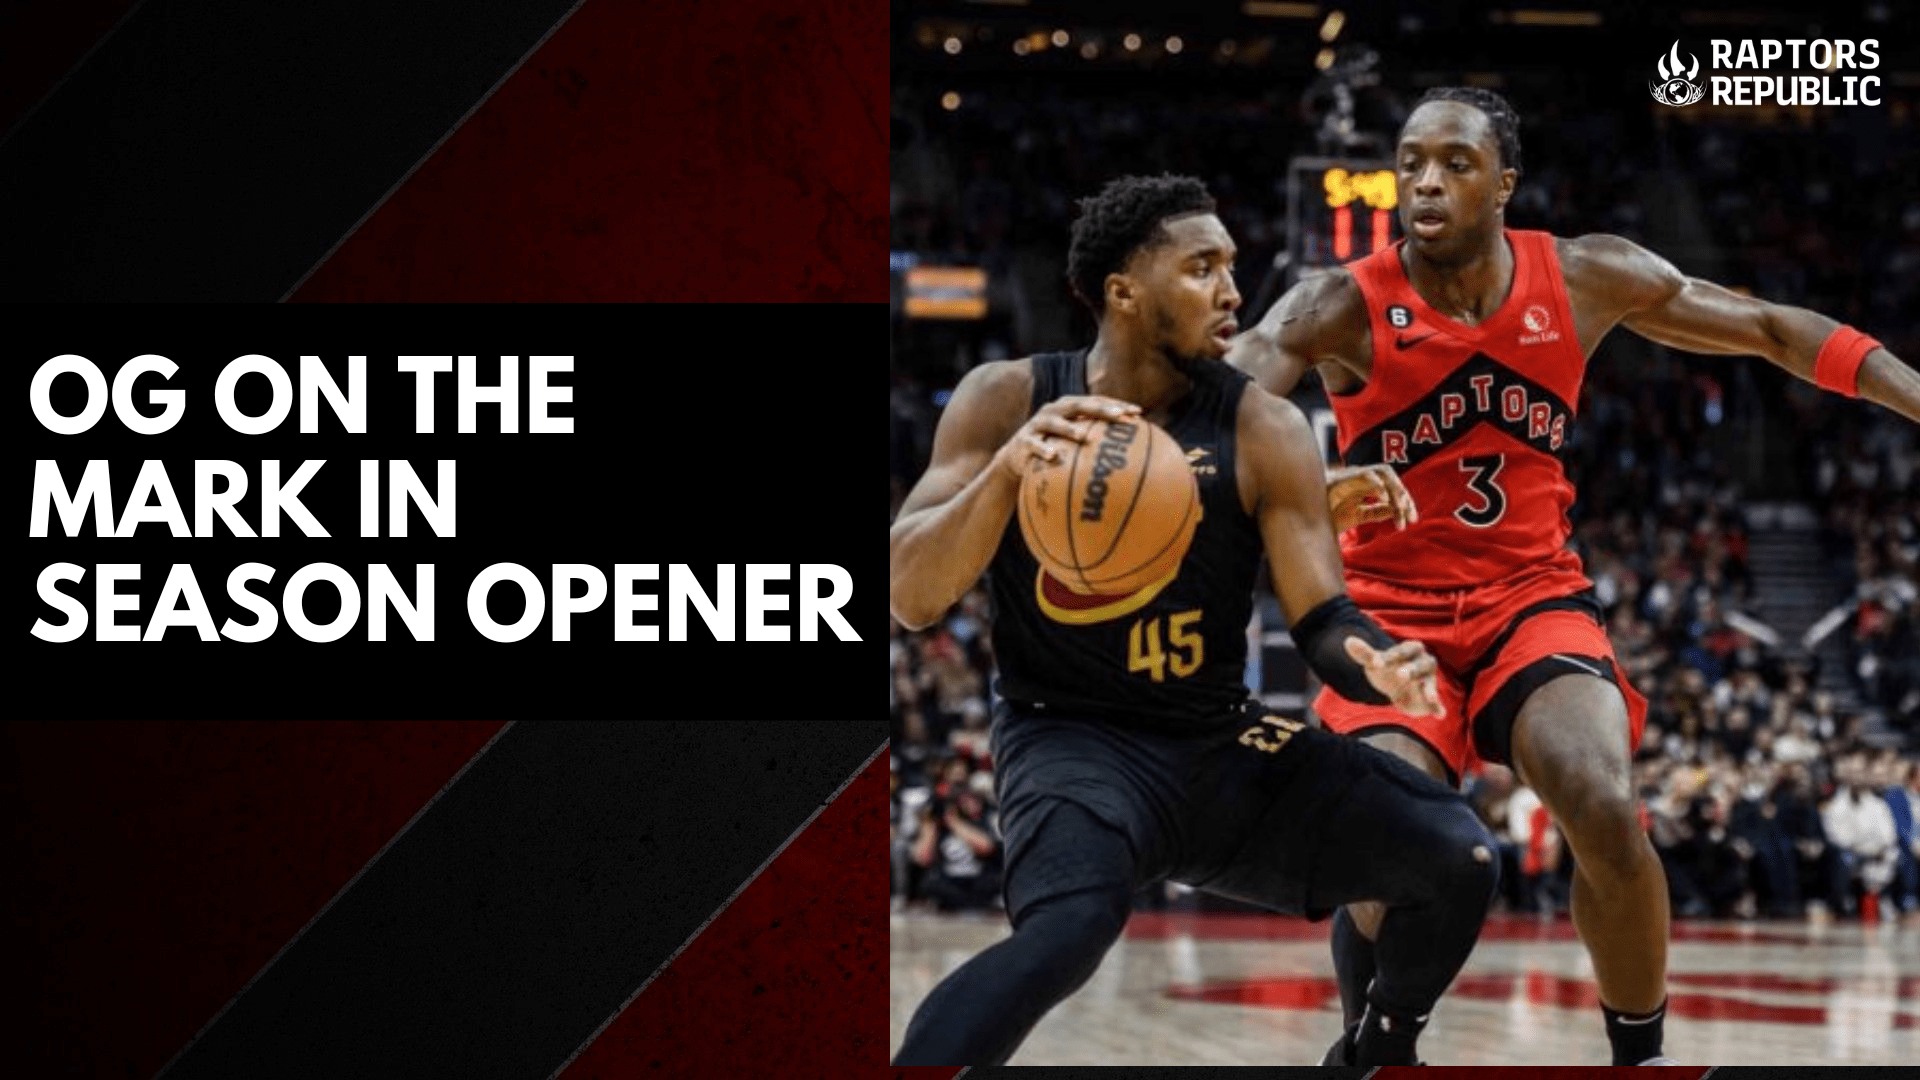 O.G. Anunoby resumes his crucial role in Toronto’s stunning win